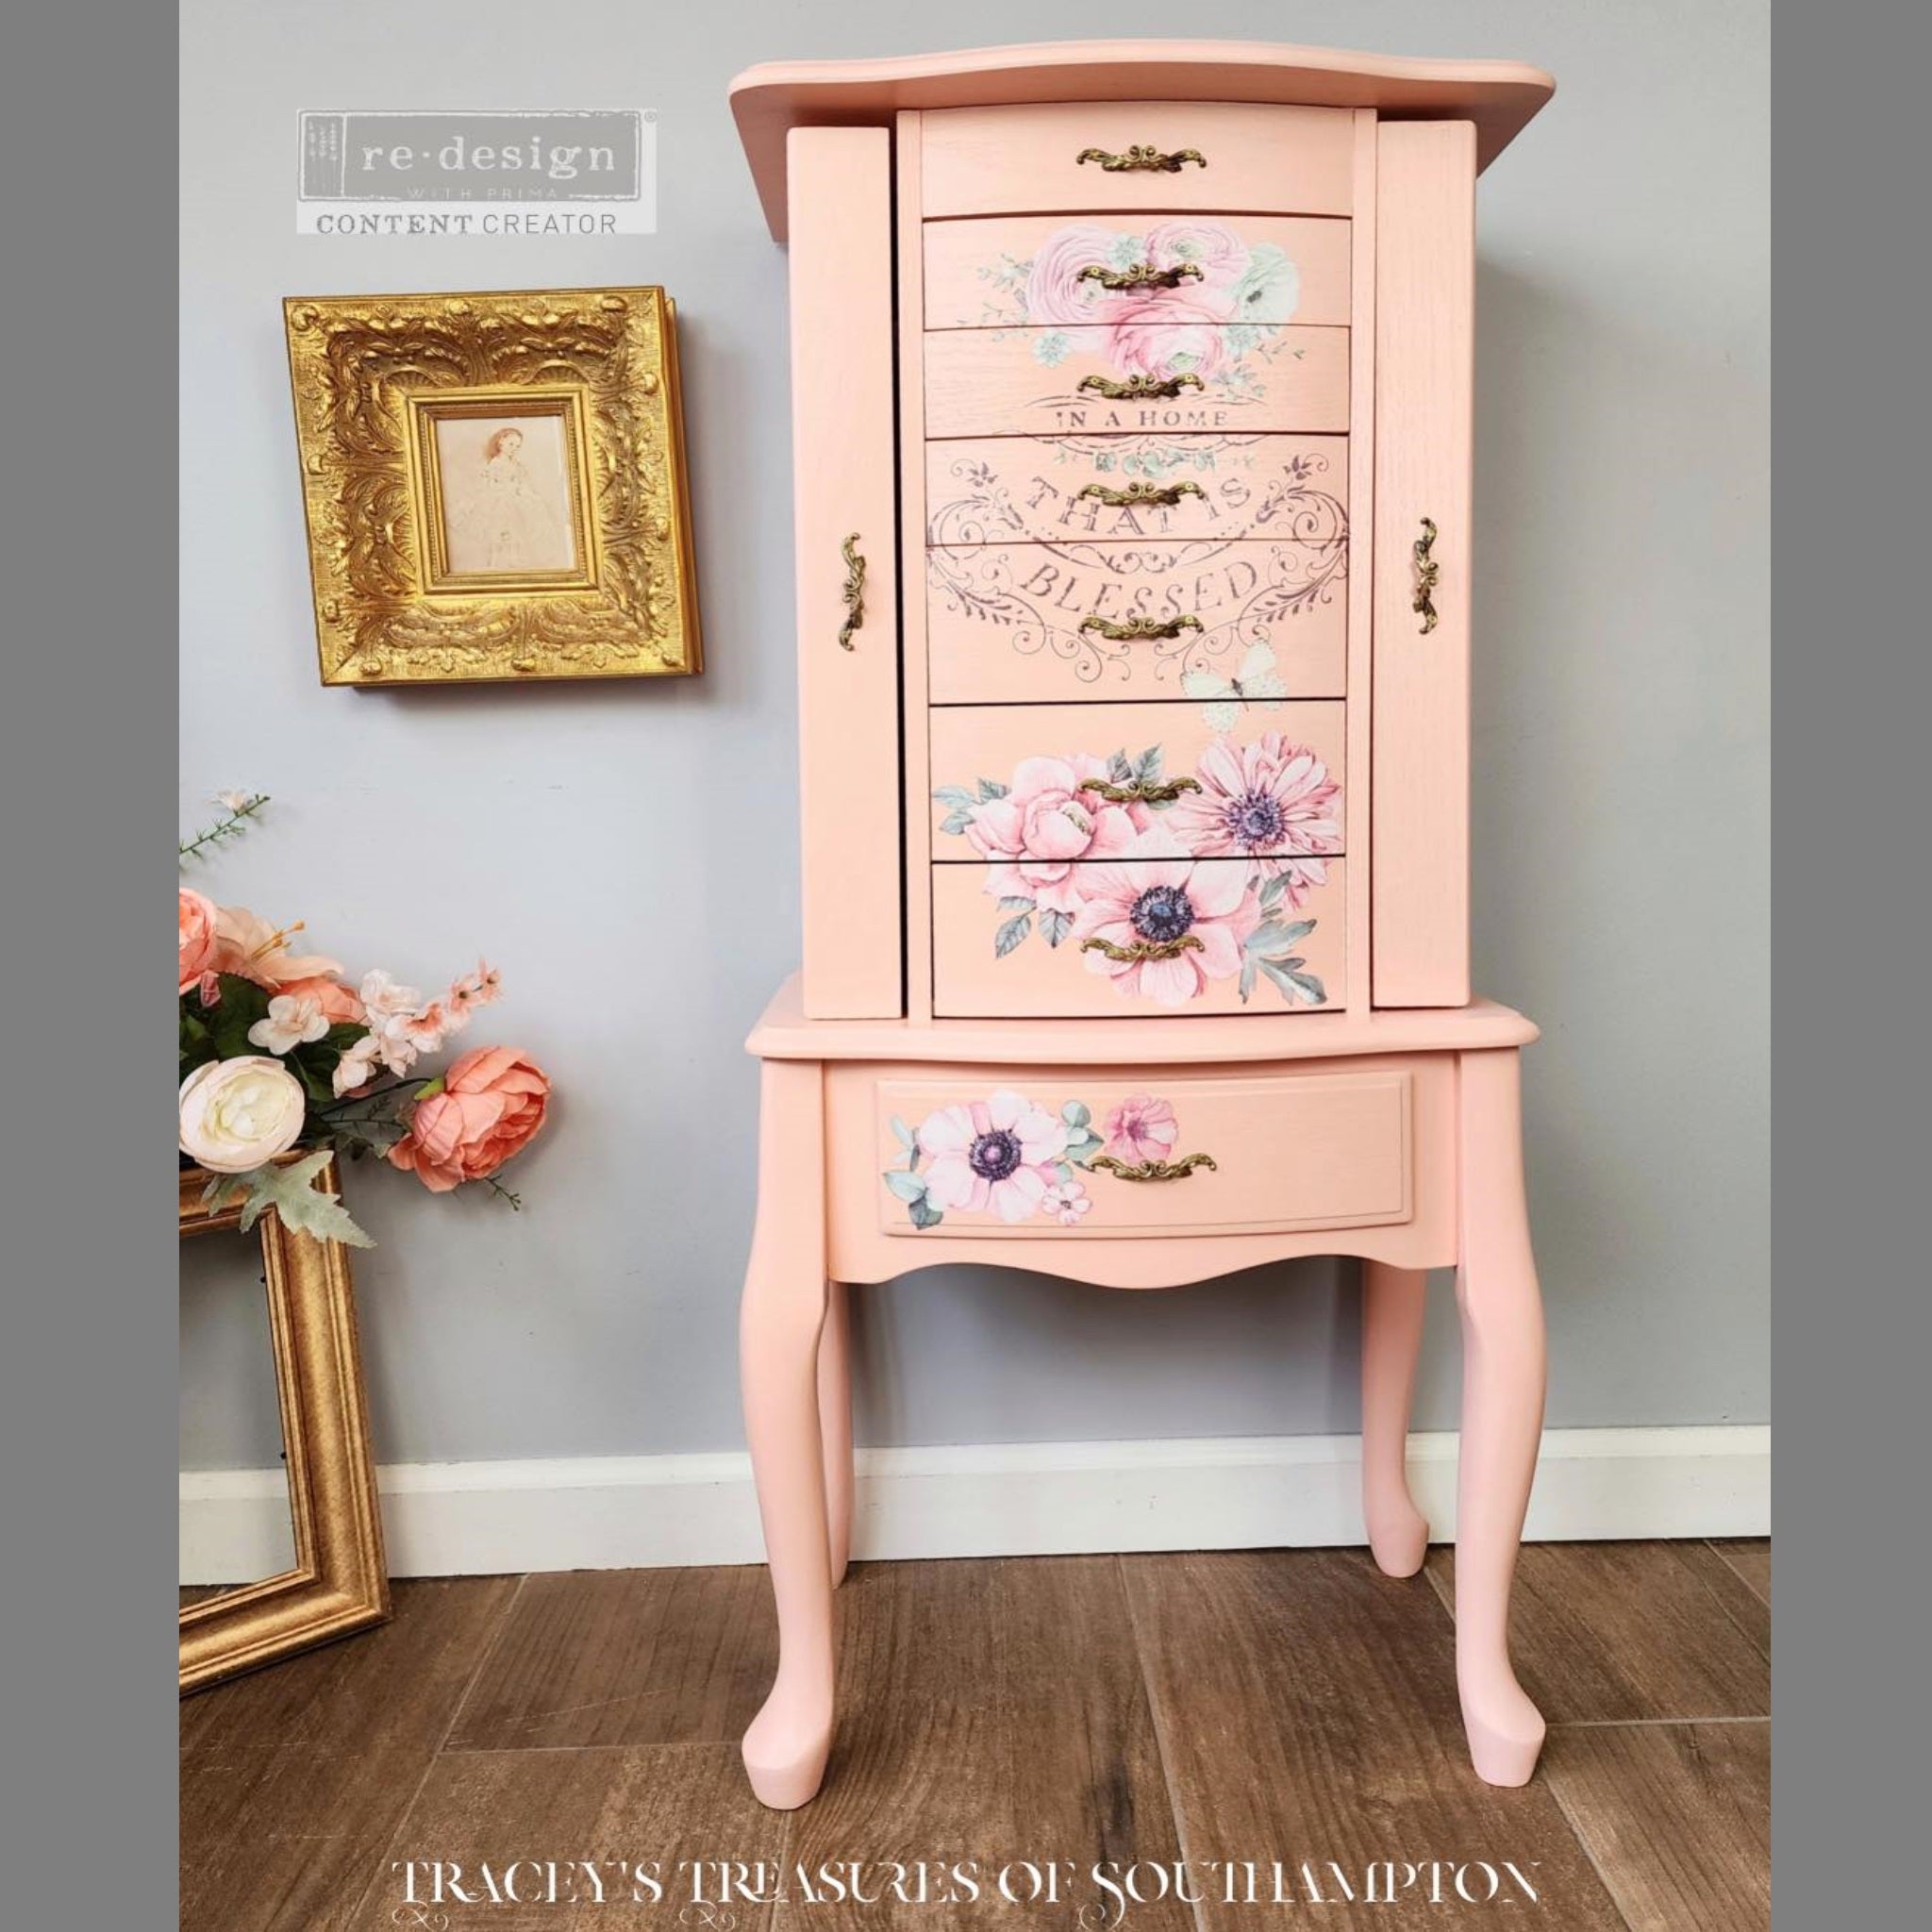 A vintage jewelry armoire refurbished by Tracey's Treasures of Southampton is painted pale coral pink and features ReDesign with Prima's Overflowing Love transfer on its front drawers.